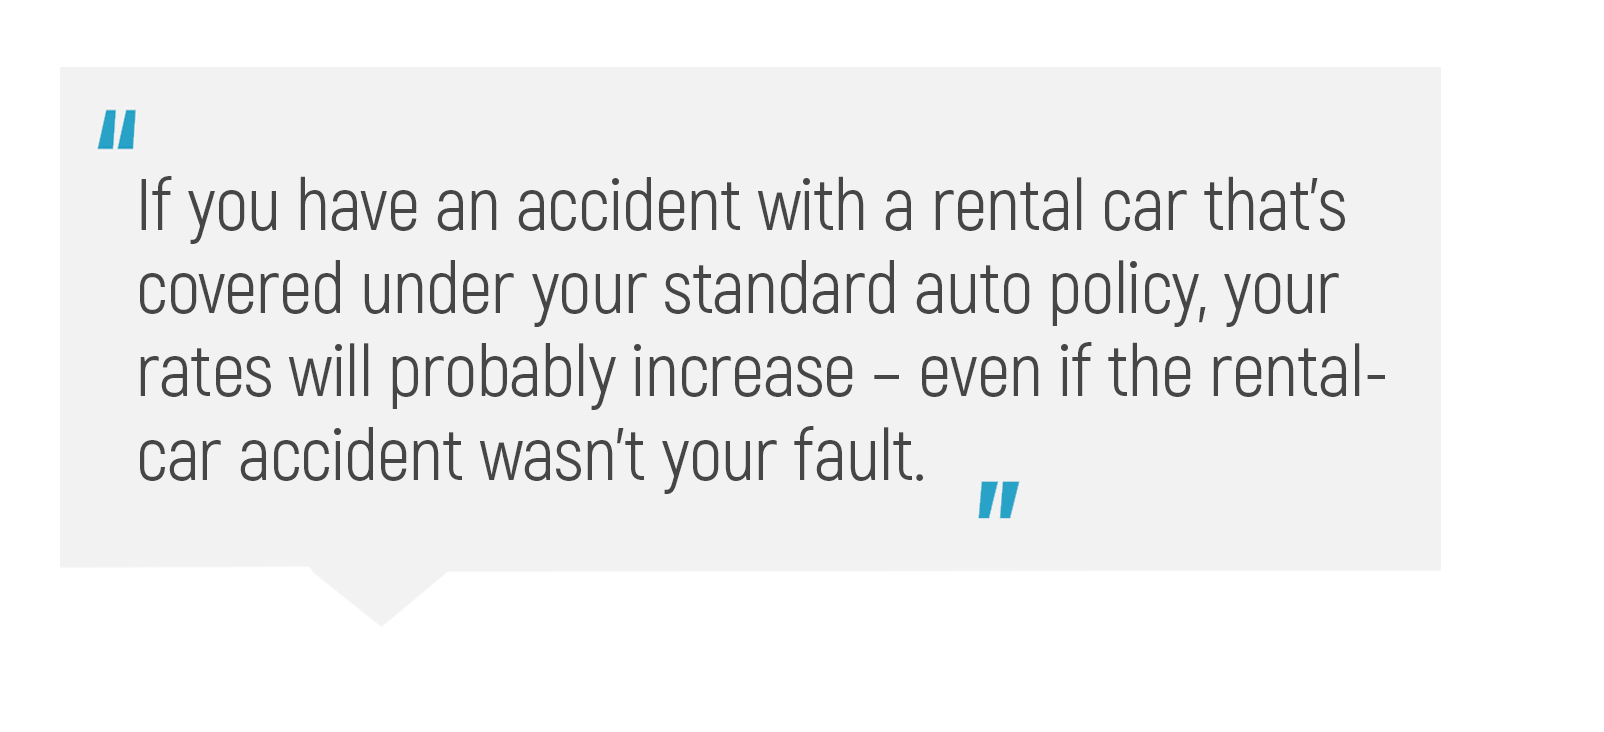 "If you have an accident with a rental car that's covered under your standard auto policy, your rates will probably increase - even if the rental-car accident wasn't your fault."